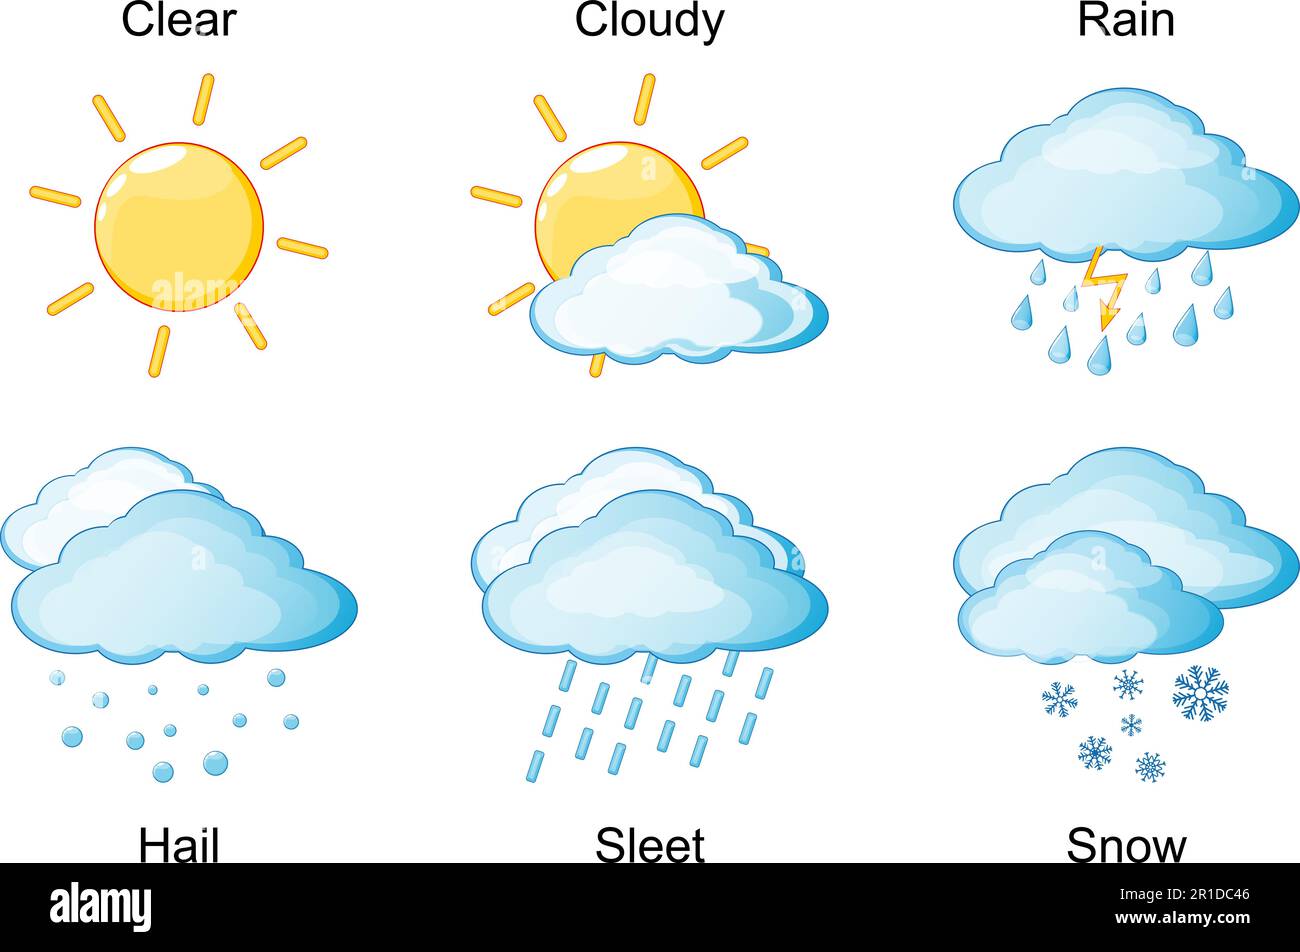 The weather. Set of meteorological Vector icons, sign and symbols with sun, clouds, and Precipitation. poster Stock Vector